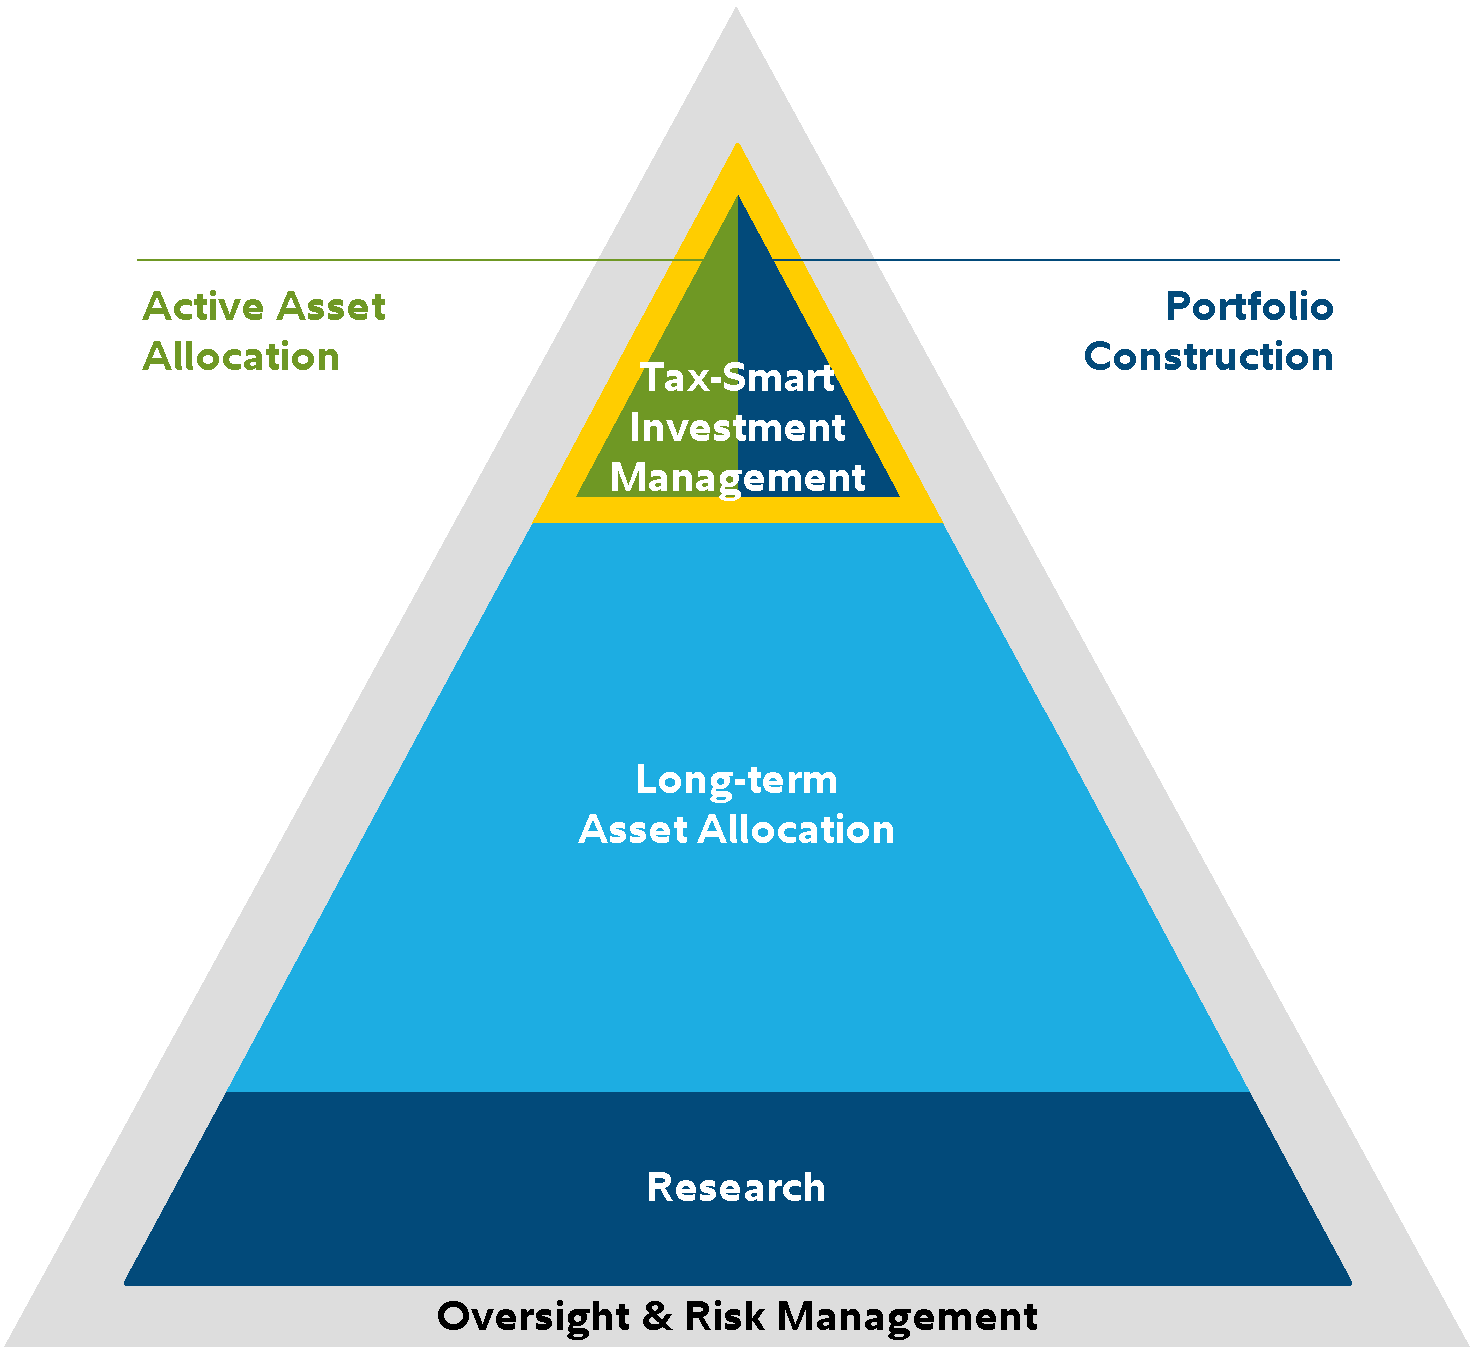 Graphic shows a pyramid depicting the multiple facets of Strategic Advisers investment process. At the base of this pyramid is Oversight and Risk Management, which helps inform all other facets. At the next level is Research, followed by Long-Term Asset Allocation. At the top of the pyramid are portfolio construction and active management of long-term asset allocations, both of which are informed by tax-smart investment management.